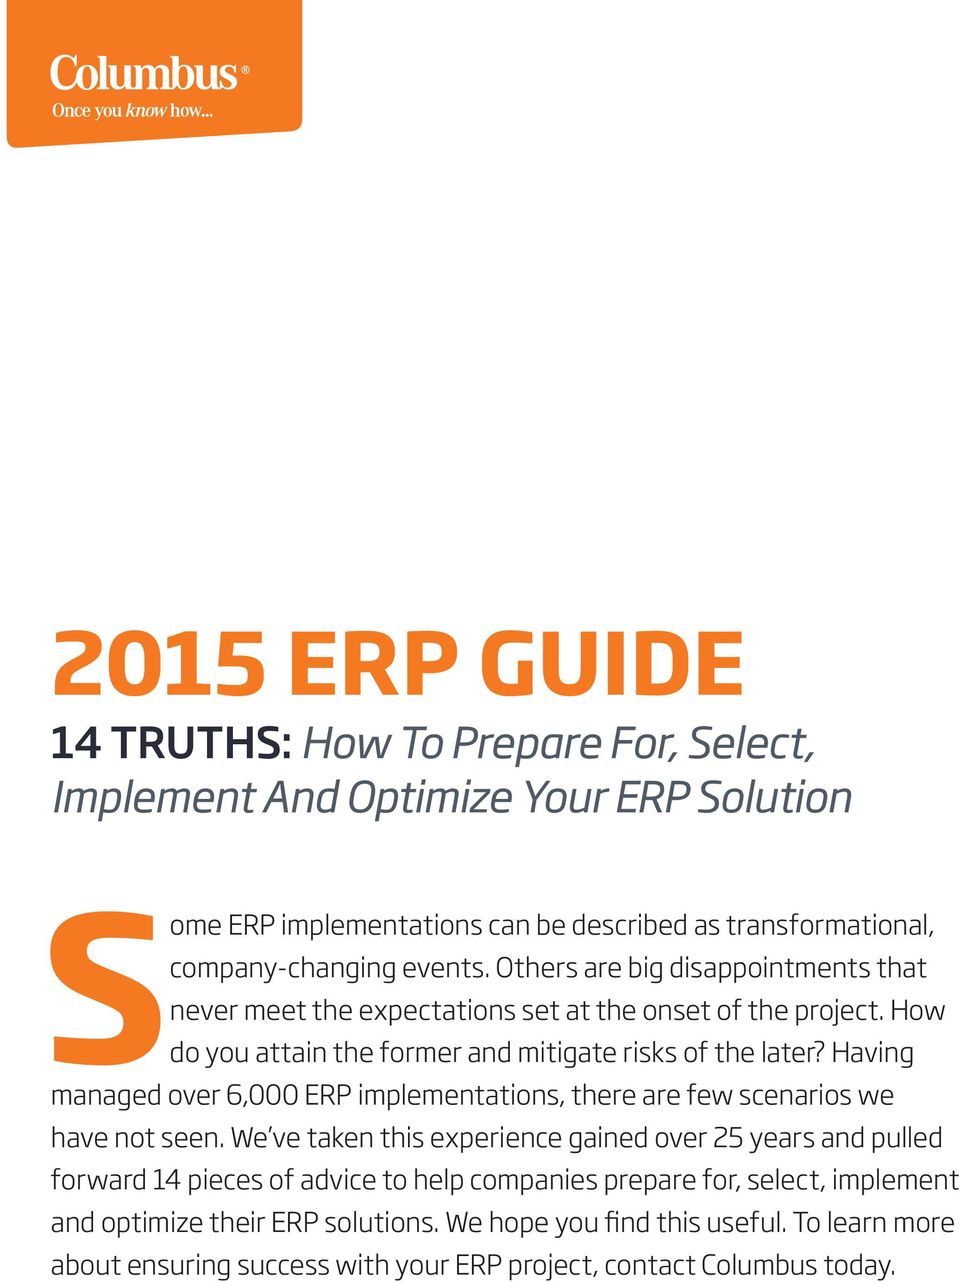 Having managed over 6,000 ERP implementations, there are few scenarios we have not seen.